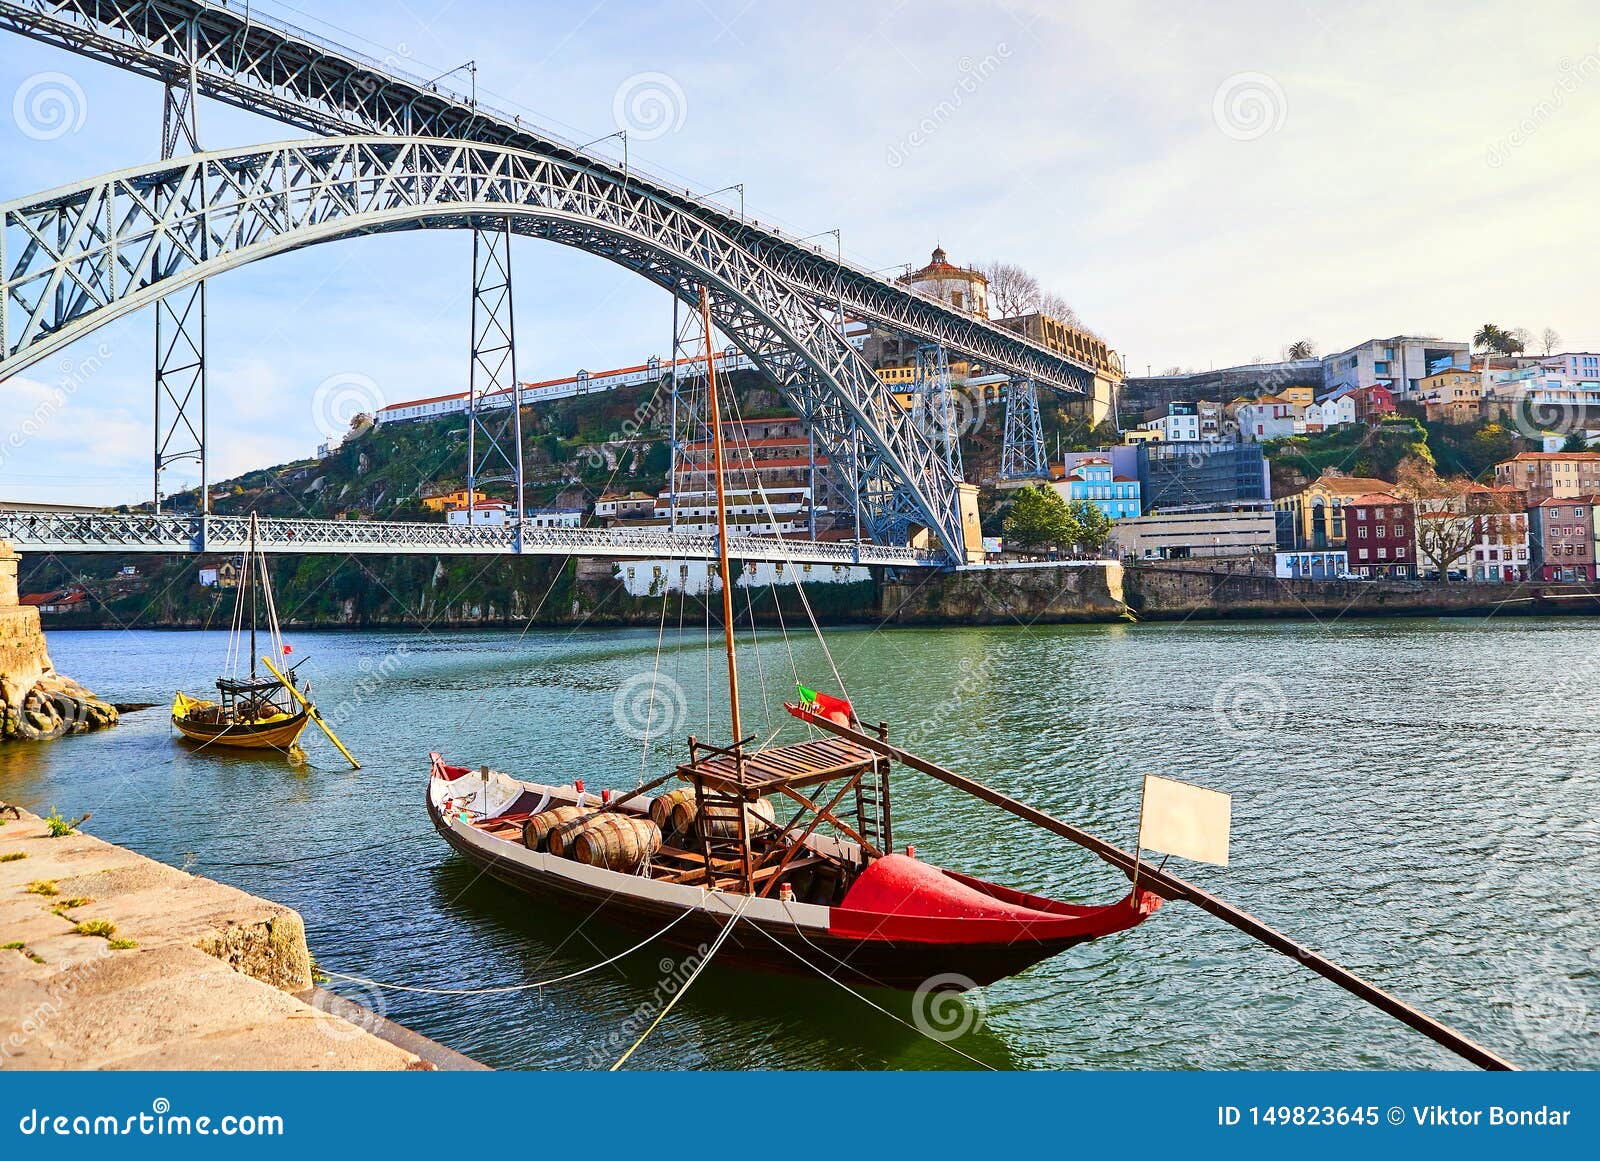 typical portuguese wooden boats, called `barcos rabelos ` transporting wine barrels on the river douro with view on villa nova de